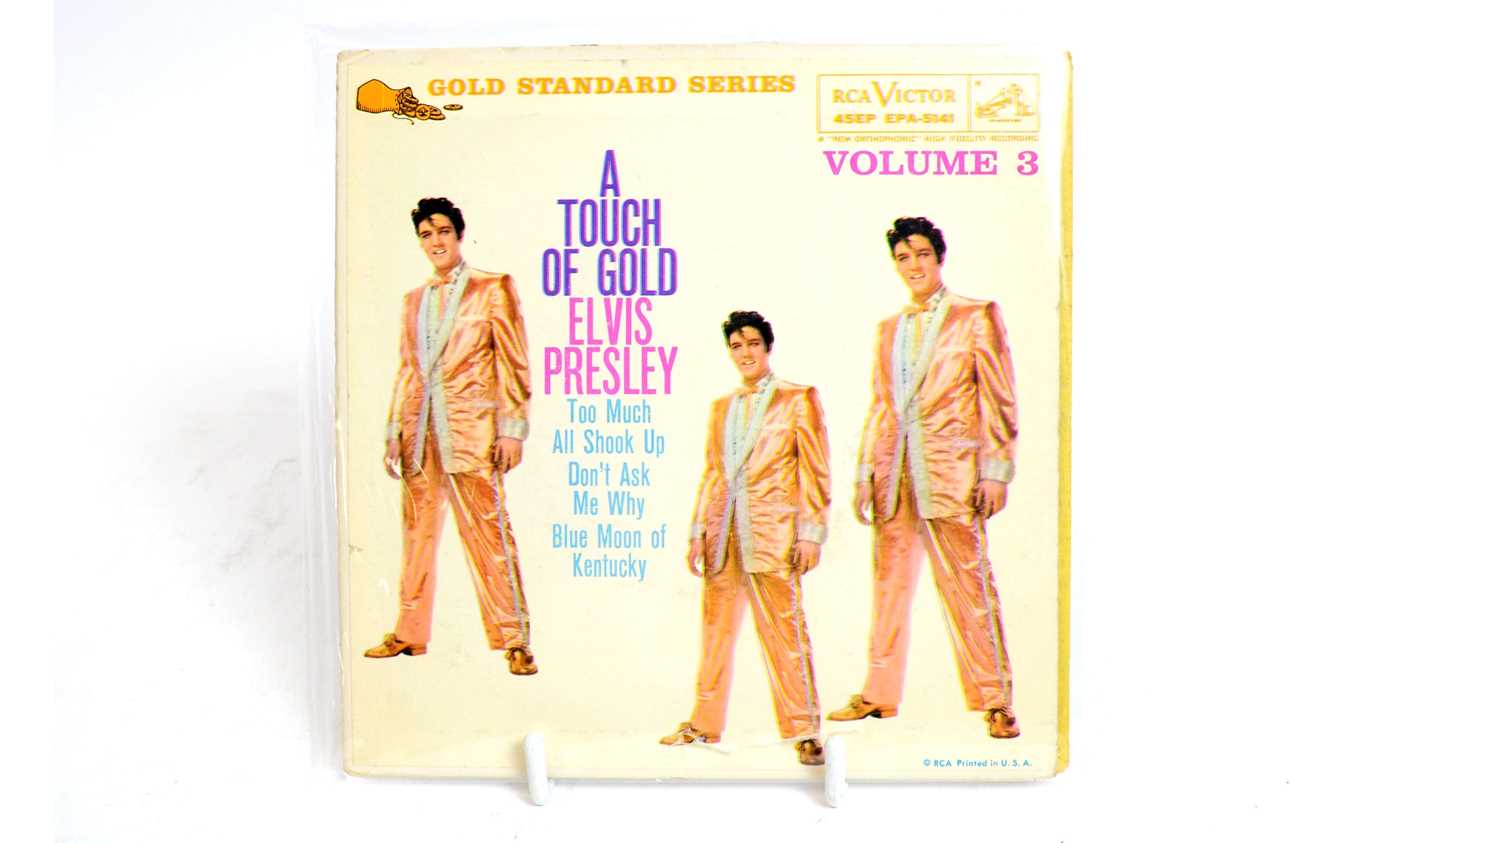 Lot 380 - American pressing of Elvis - A Touch of Gold Vol 3 EP